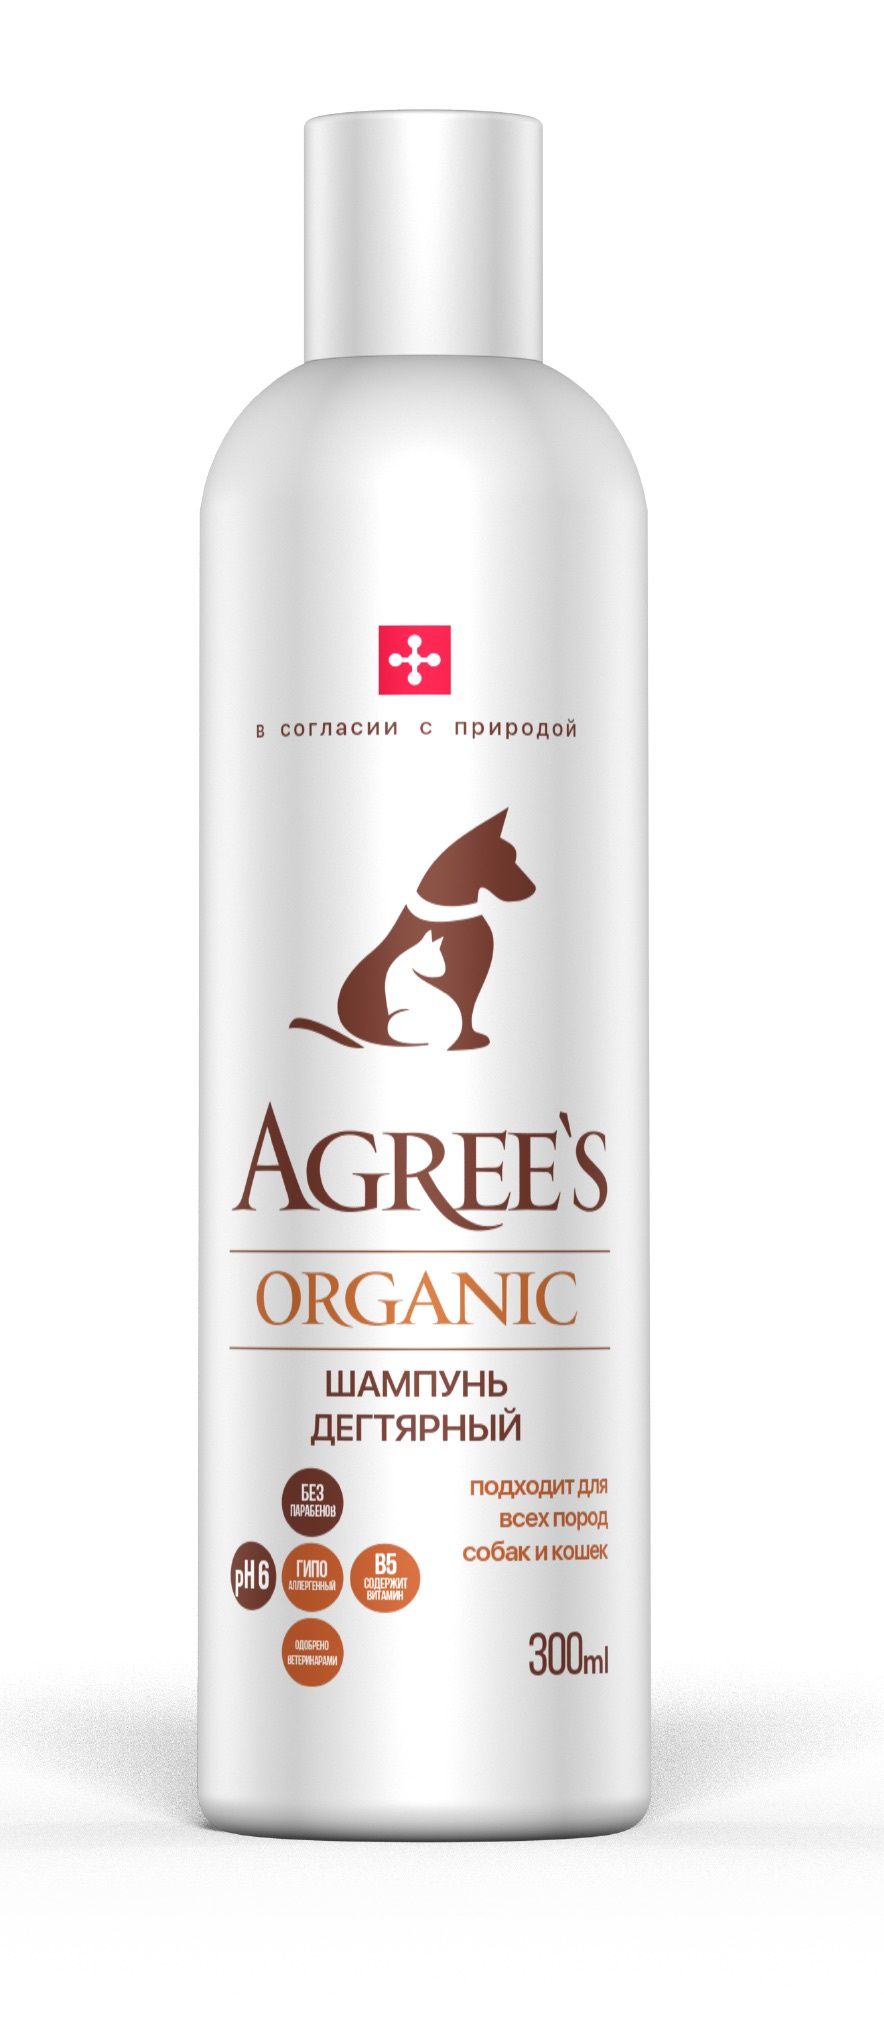    Agree's for pets ORGANIC,  ,    